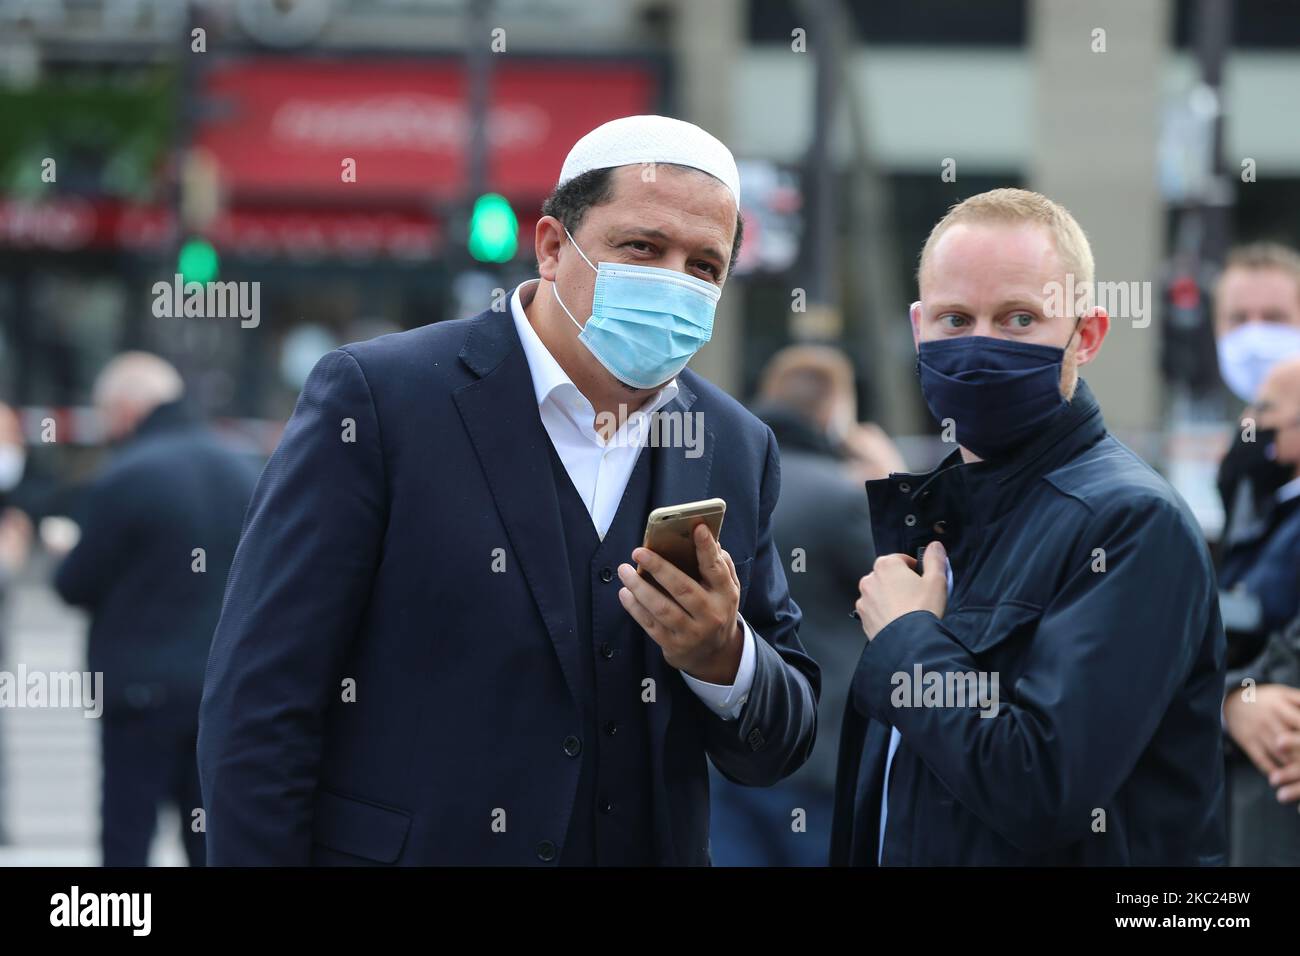 Imam of Drancy Hassen Chalghoumi (L), stand as people gather on Place de la Republique in Paris on October 18, 2020, in homage to history teacher Samuel Paty two days after he was beheaded by an attacker who was shot dead by policemen. Thousands of people rally in Paris and other French cities on October 18 in a show of solidarity and defiance after a teacher was beheaded for showing pupils cartoons of the Prophet Mohammed. His murder in a Paris suburb on October 16 shocked the country and brought back memories of a wave of Islamist violence in 2015. (Photo by Michel Stoupak/NurPhoto) Stock Photo